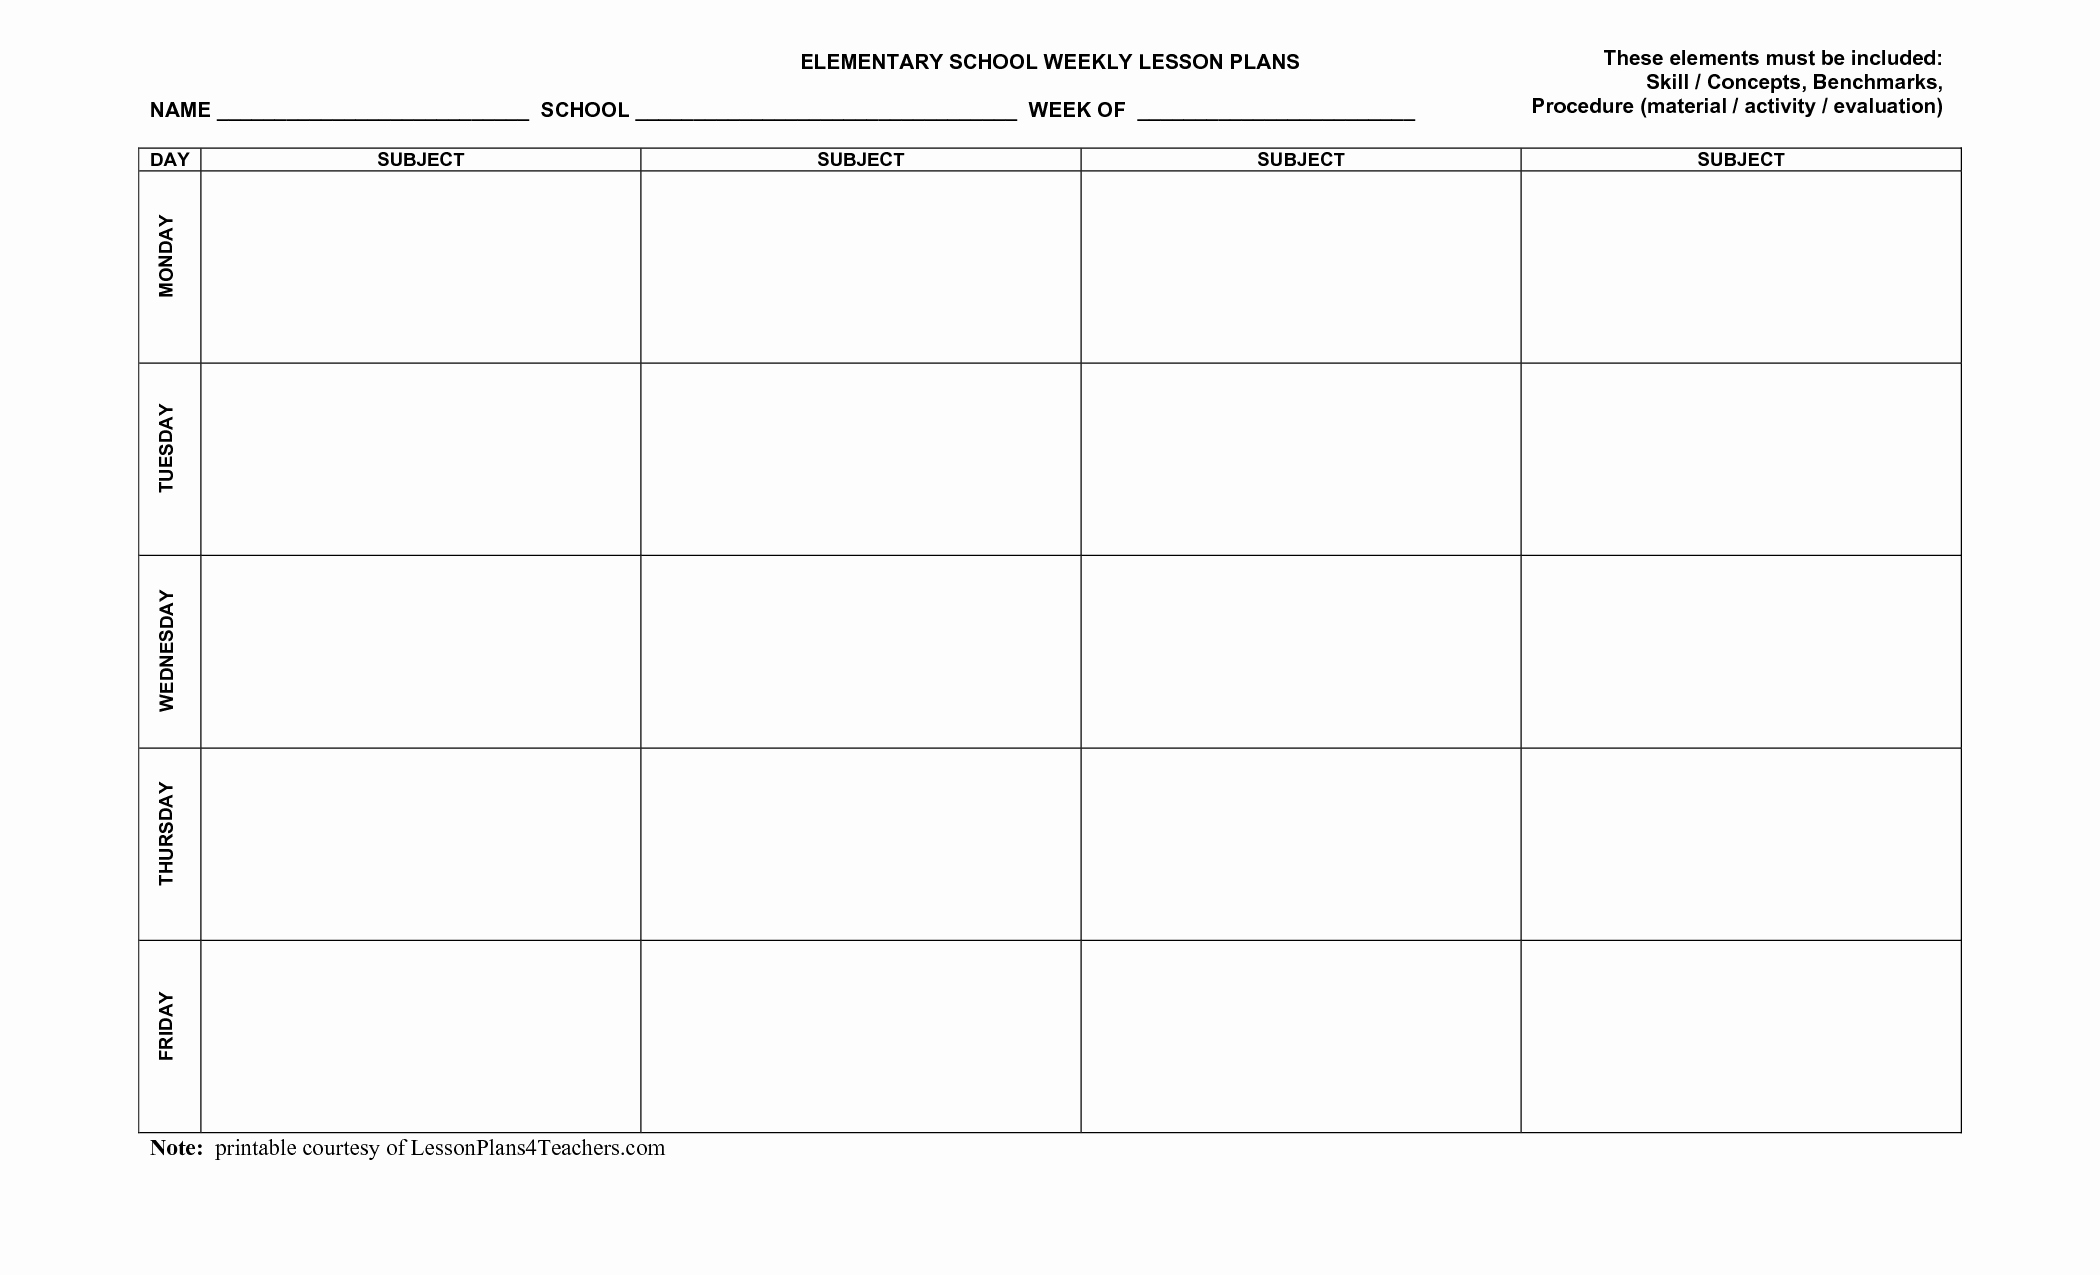 Free Lesson Plan Template Beautiful Blank Weekly Lesson Plan Templates Mqfotfas